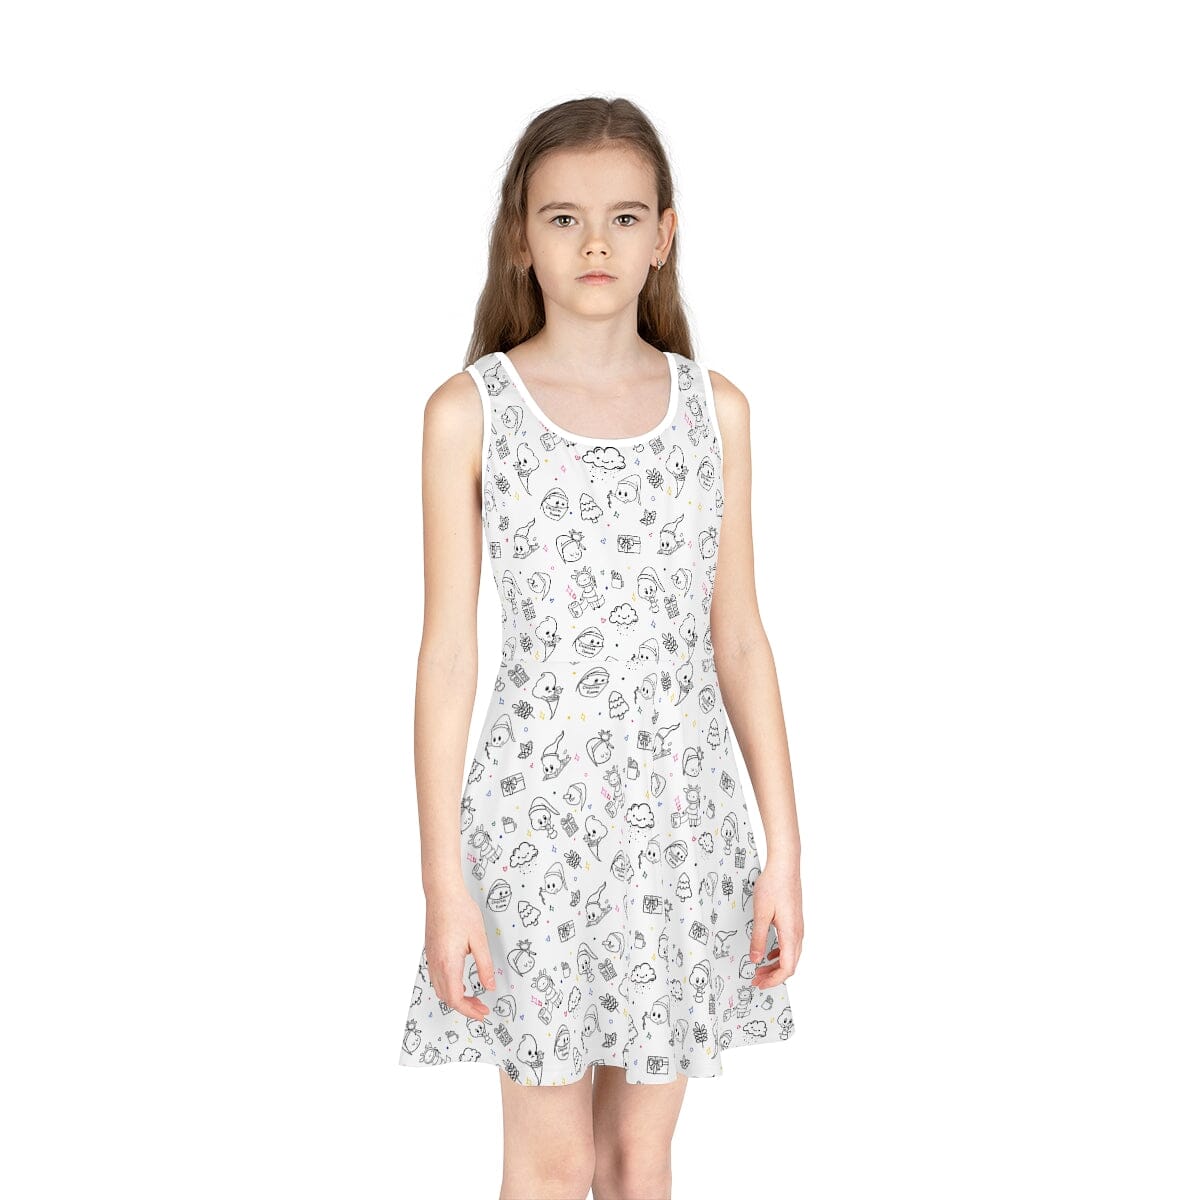 Poop Print - Girls' Sleeveless Sundress All Over Prints Printify Seam thread color automatically matched to design 2T 